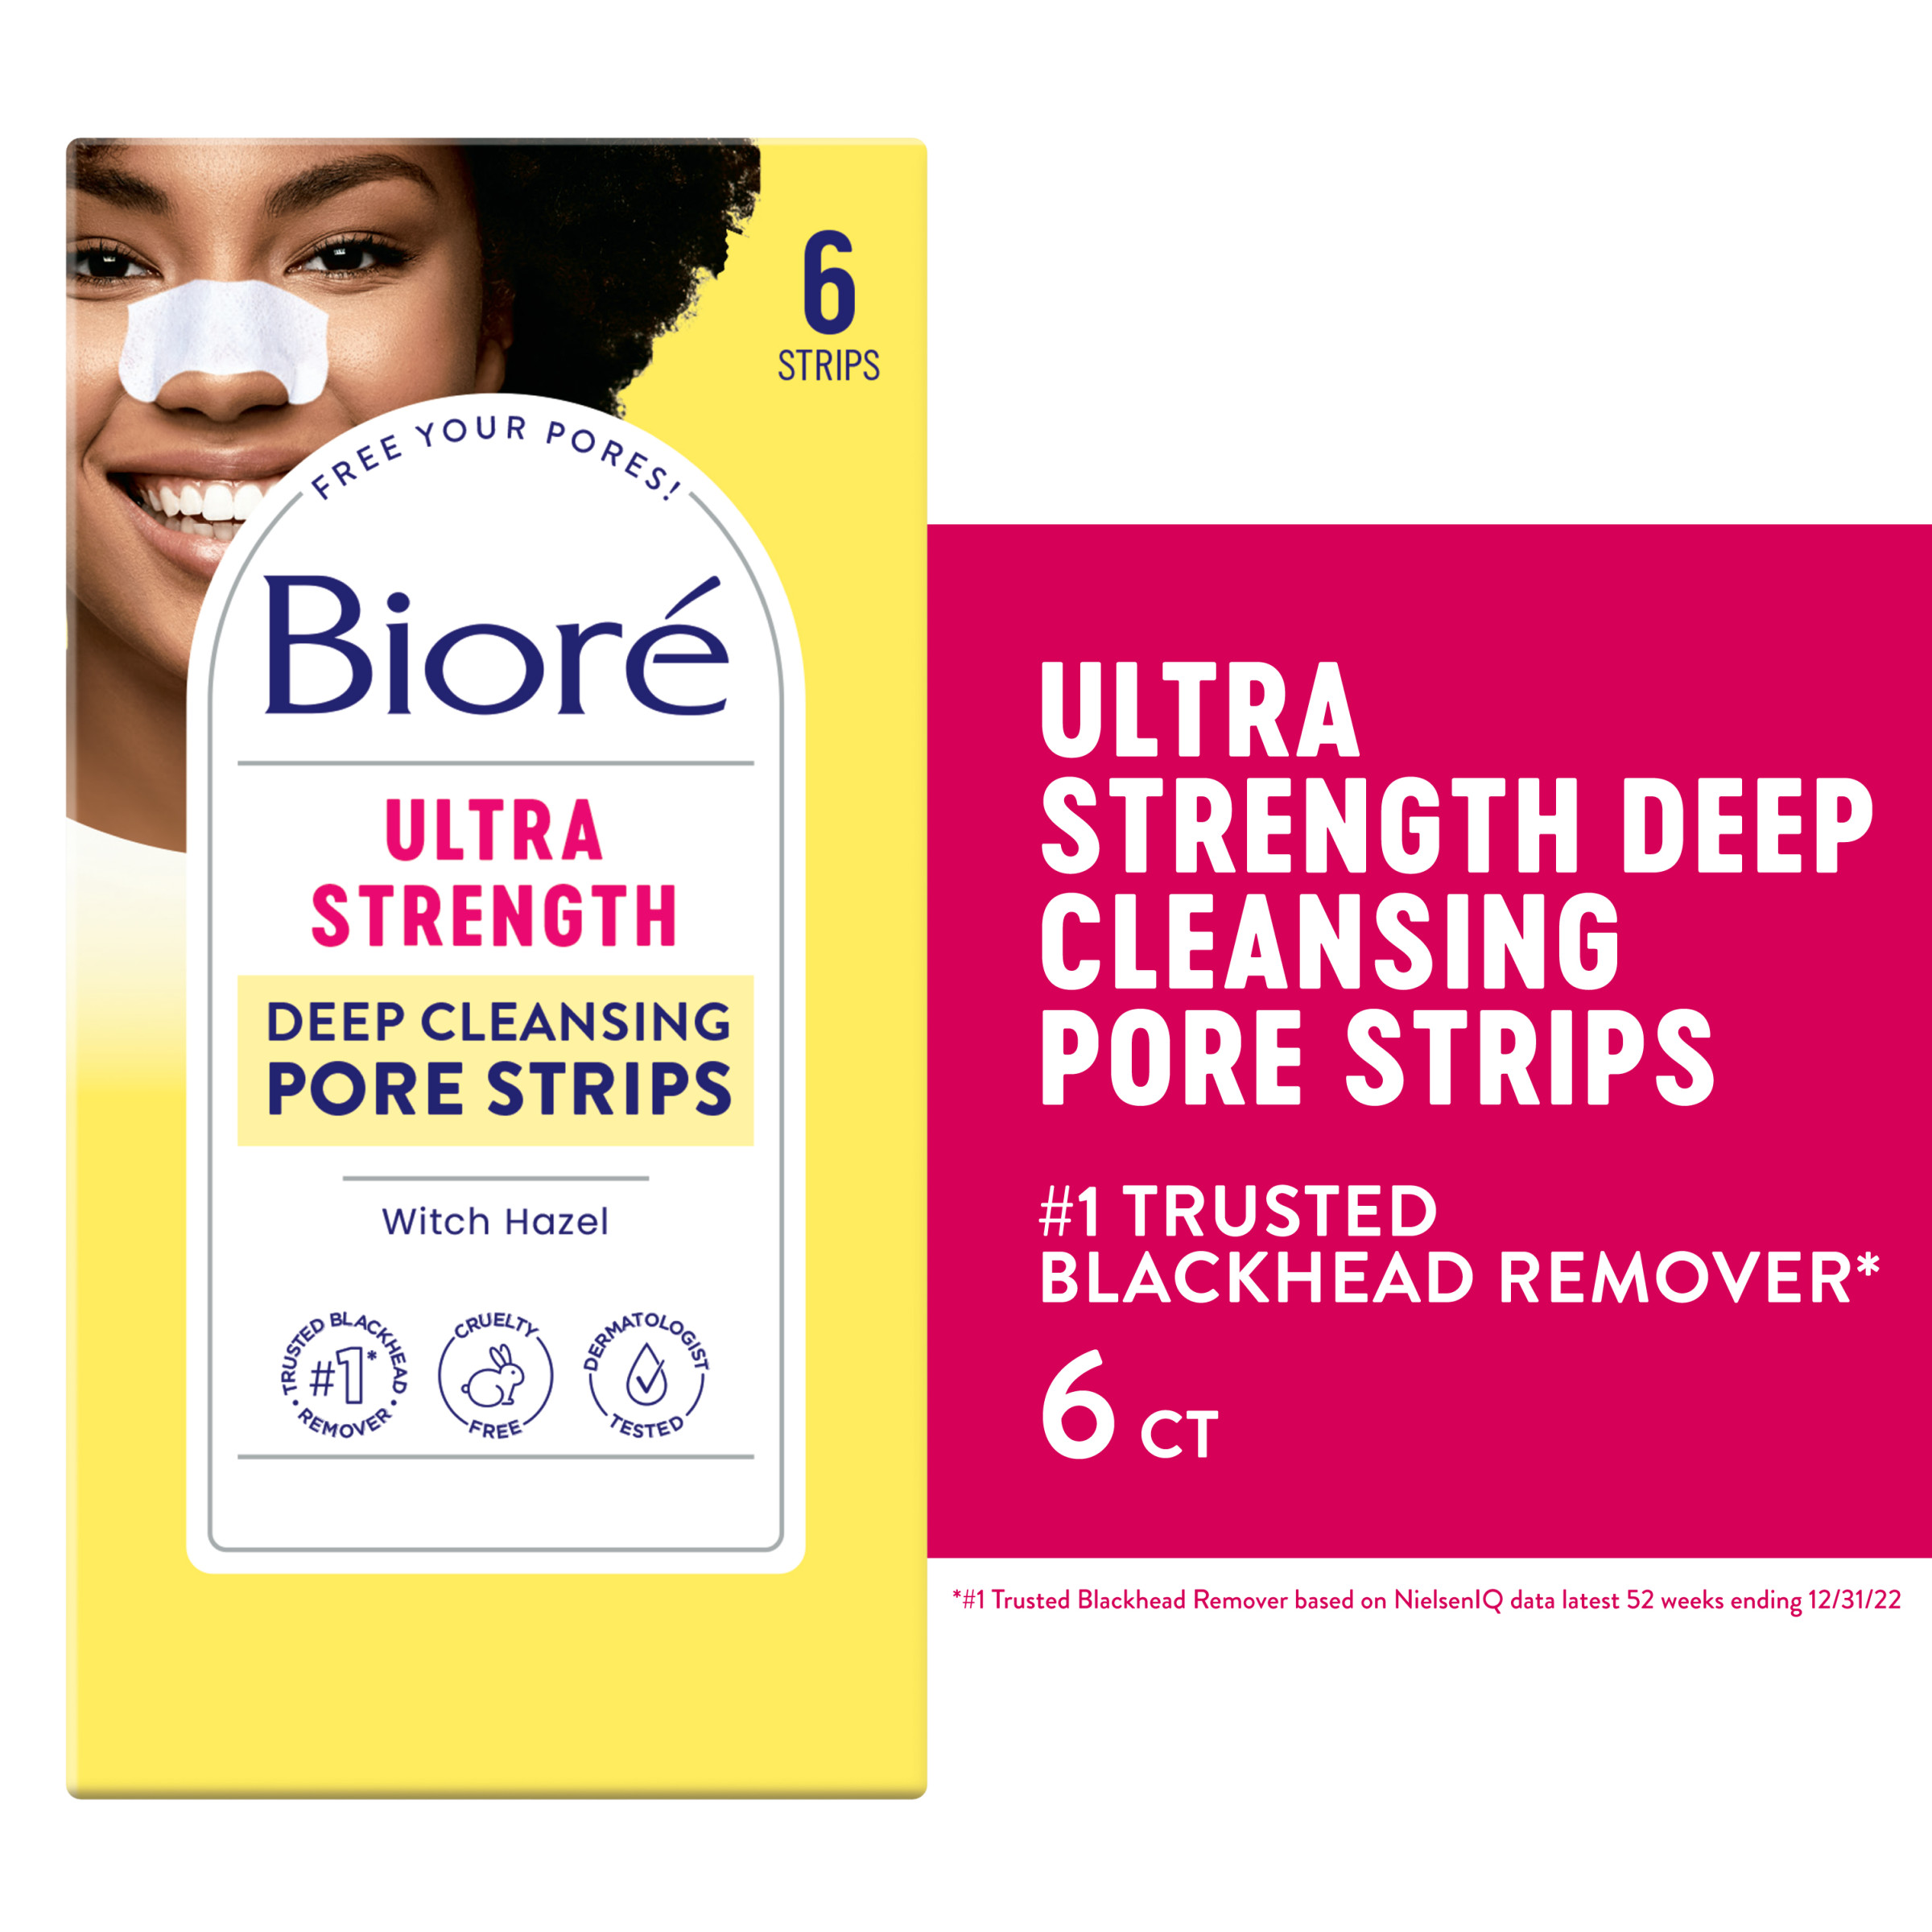 Biore Blackhead Remover Pore Strip, Witch Hazel Ultra Cleansing Pore Strips, Oil-Free, Nose Strips, Cruelty Free - 6 Ct - image 1 of 11